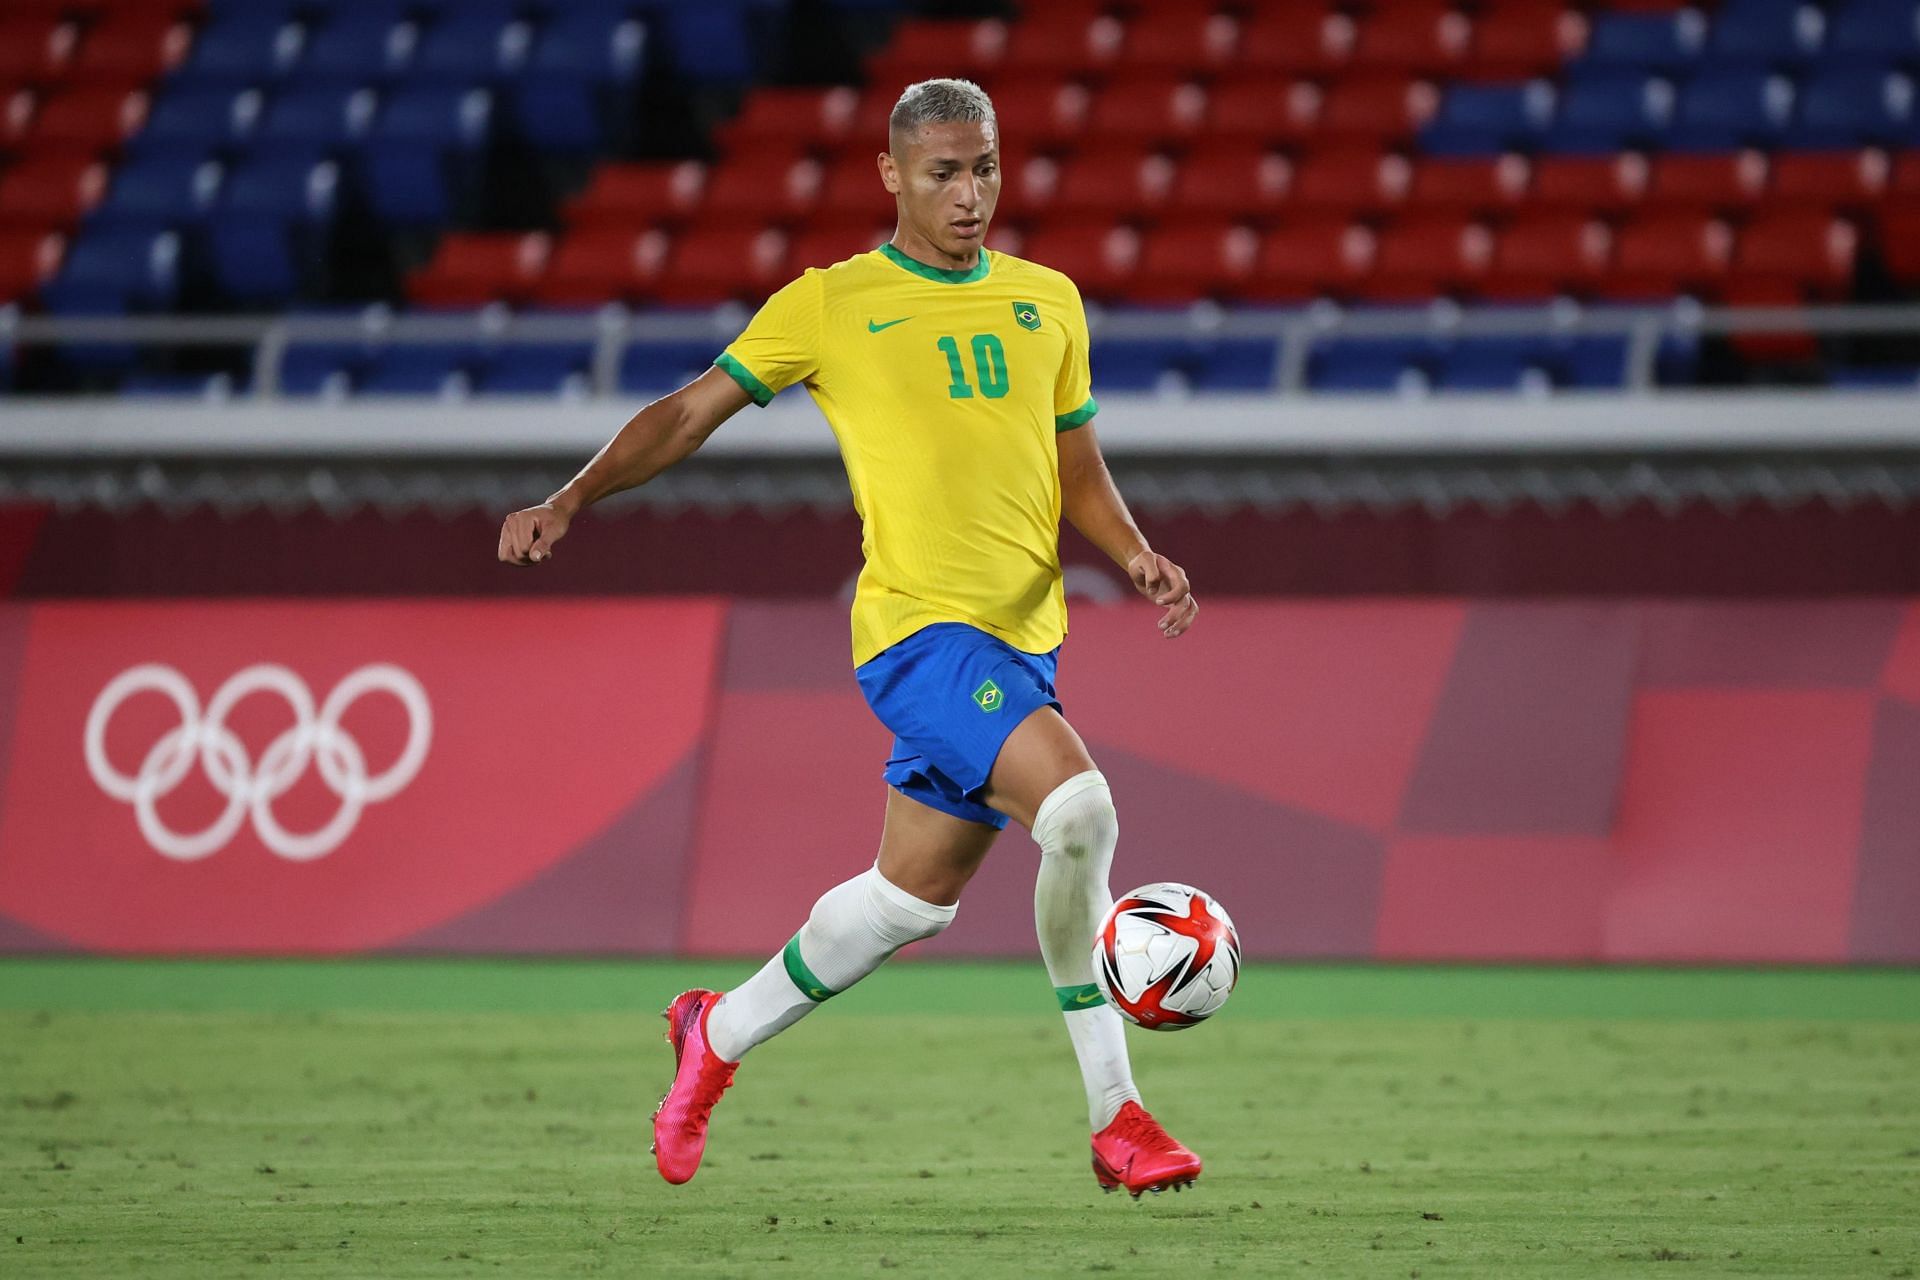 Richarlison sporting the #10 shirt for Brazil at the Tokyo Olympics